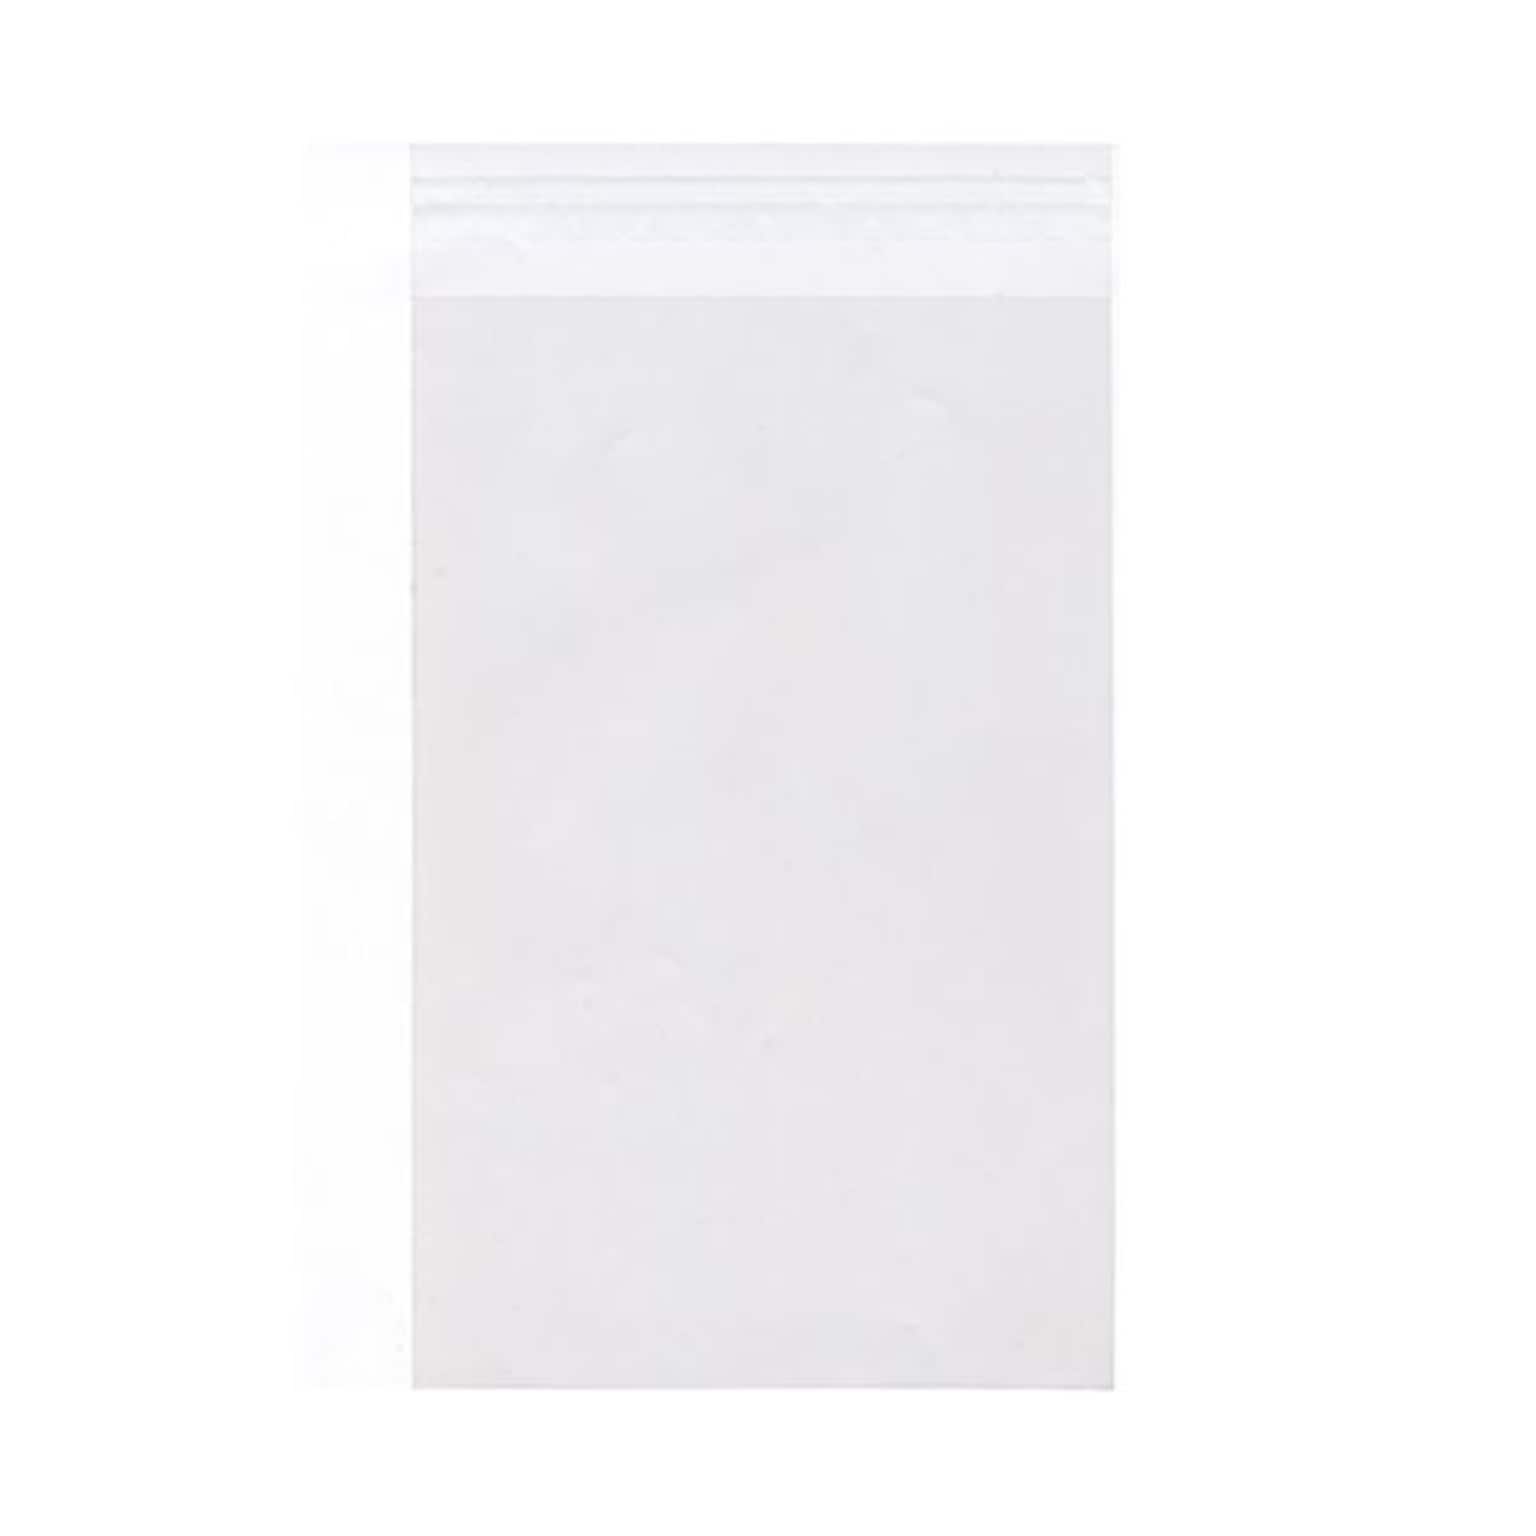 JAM Paper Cello Sleeves with Peel & Seal Closure, 10 x 13, Clear, 100/Pack (10X13CELLO)